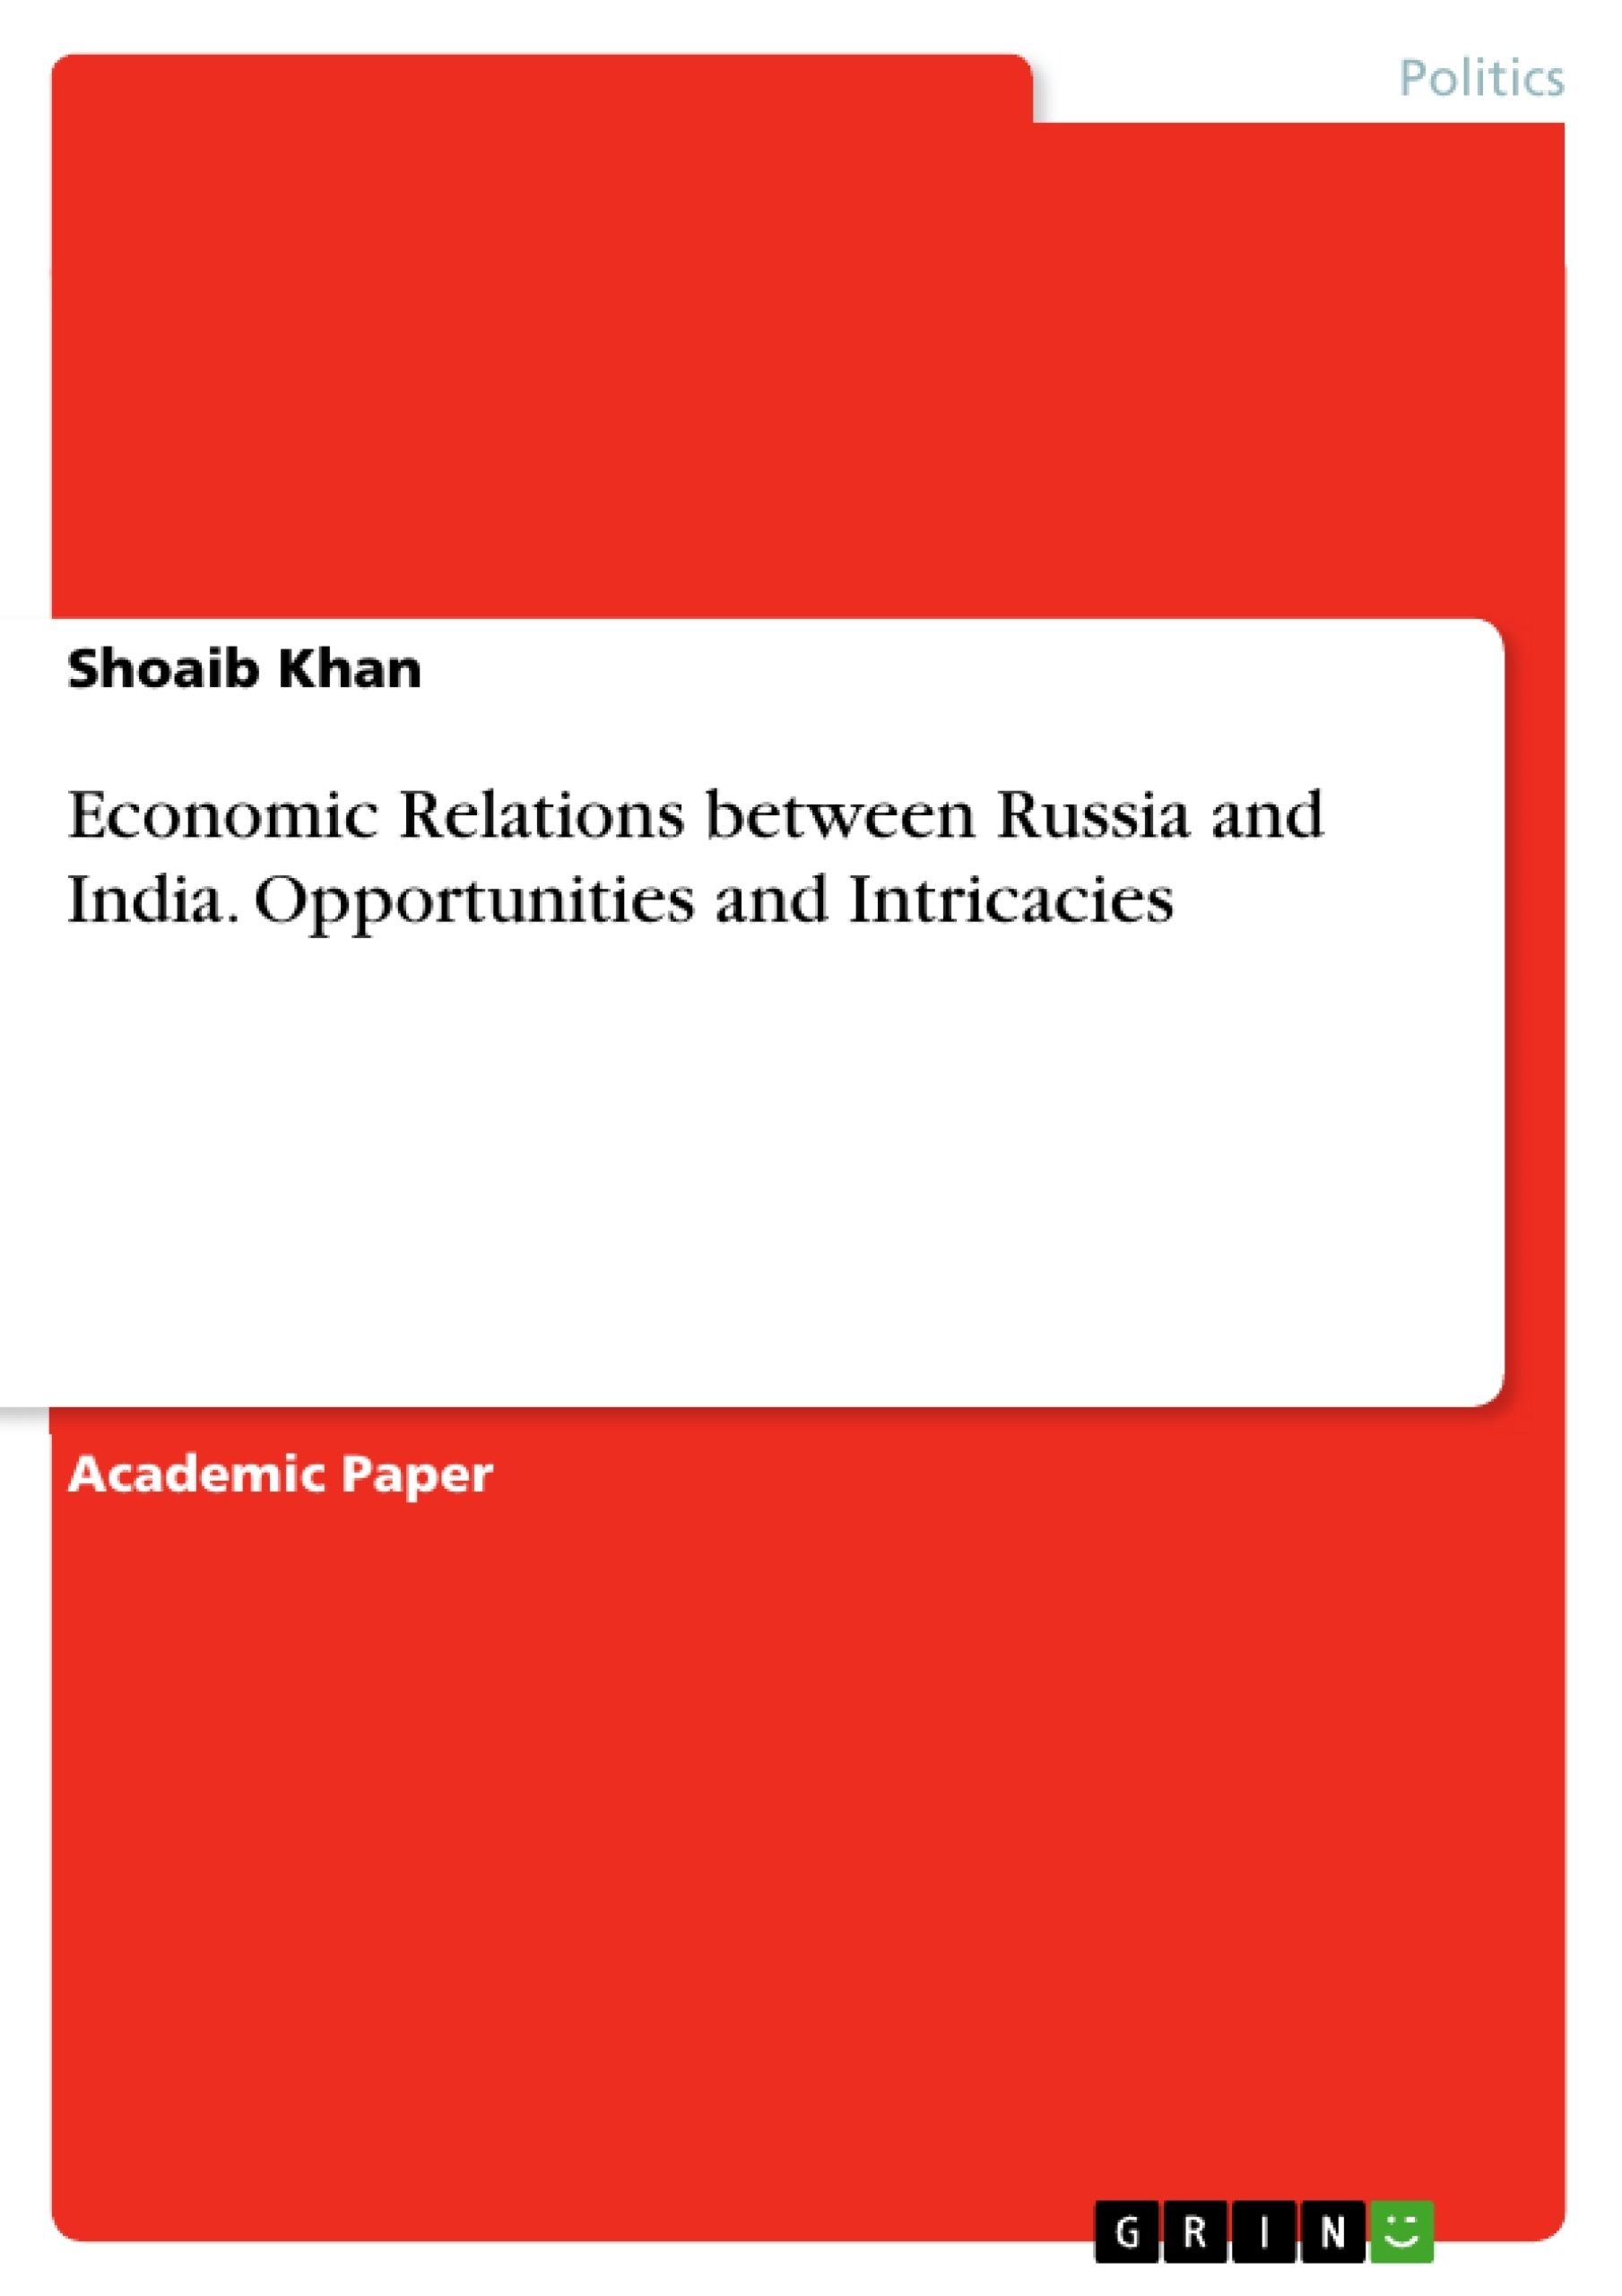 Title: Economic Relations between Russia and India. Opportunities and Intricacies